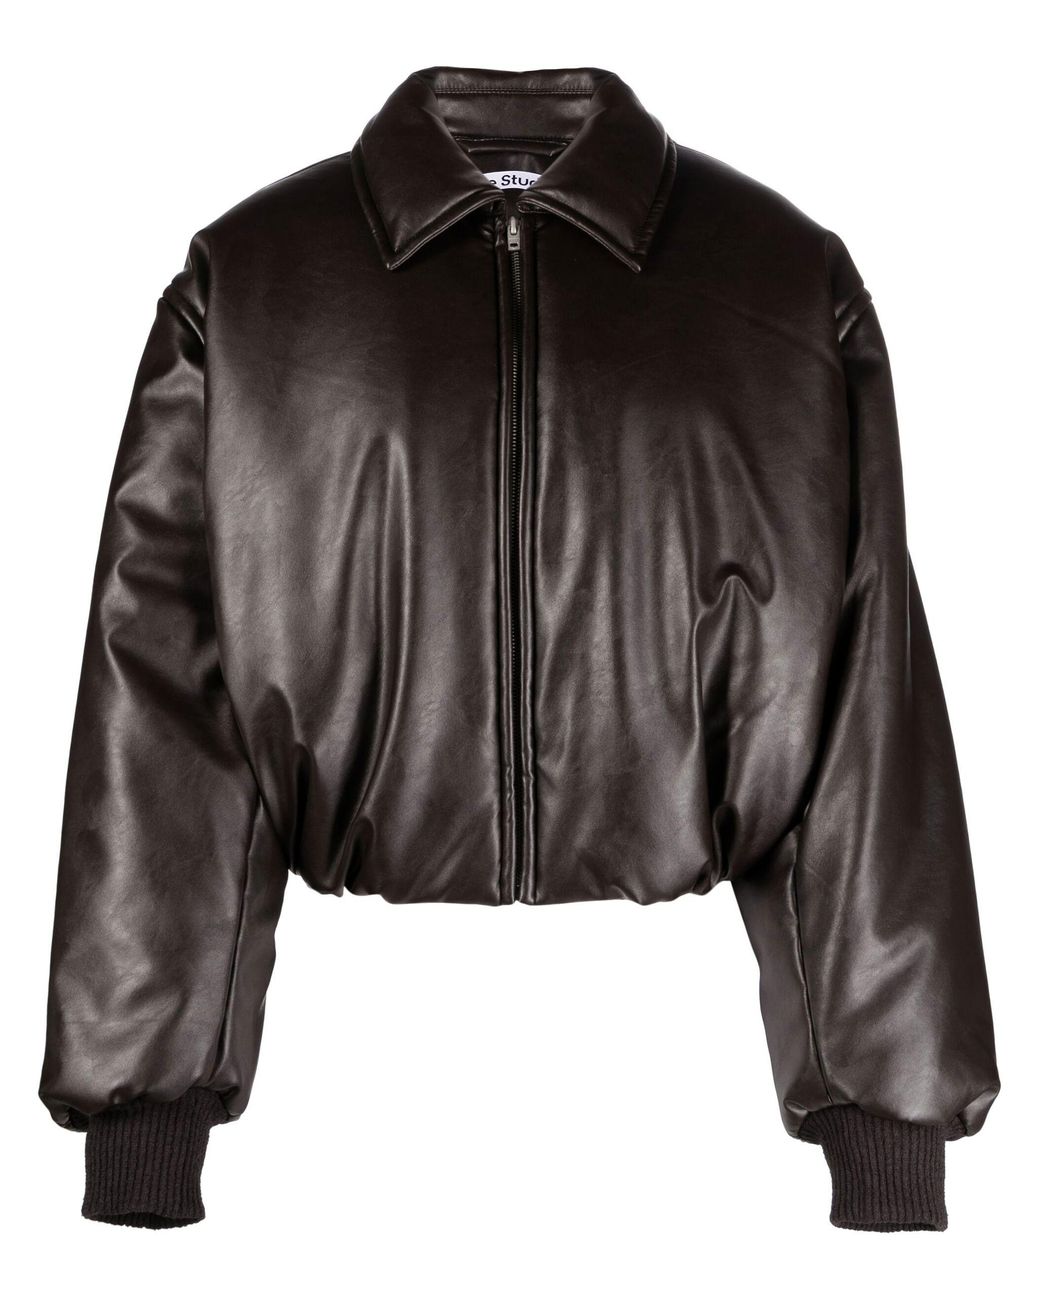 Acne Studios Faux Leather Bomber Jacket in Black | Lyst